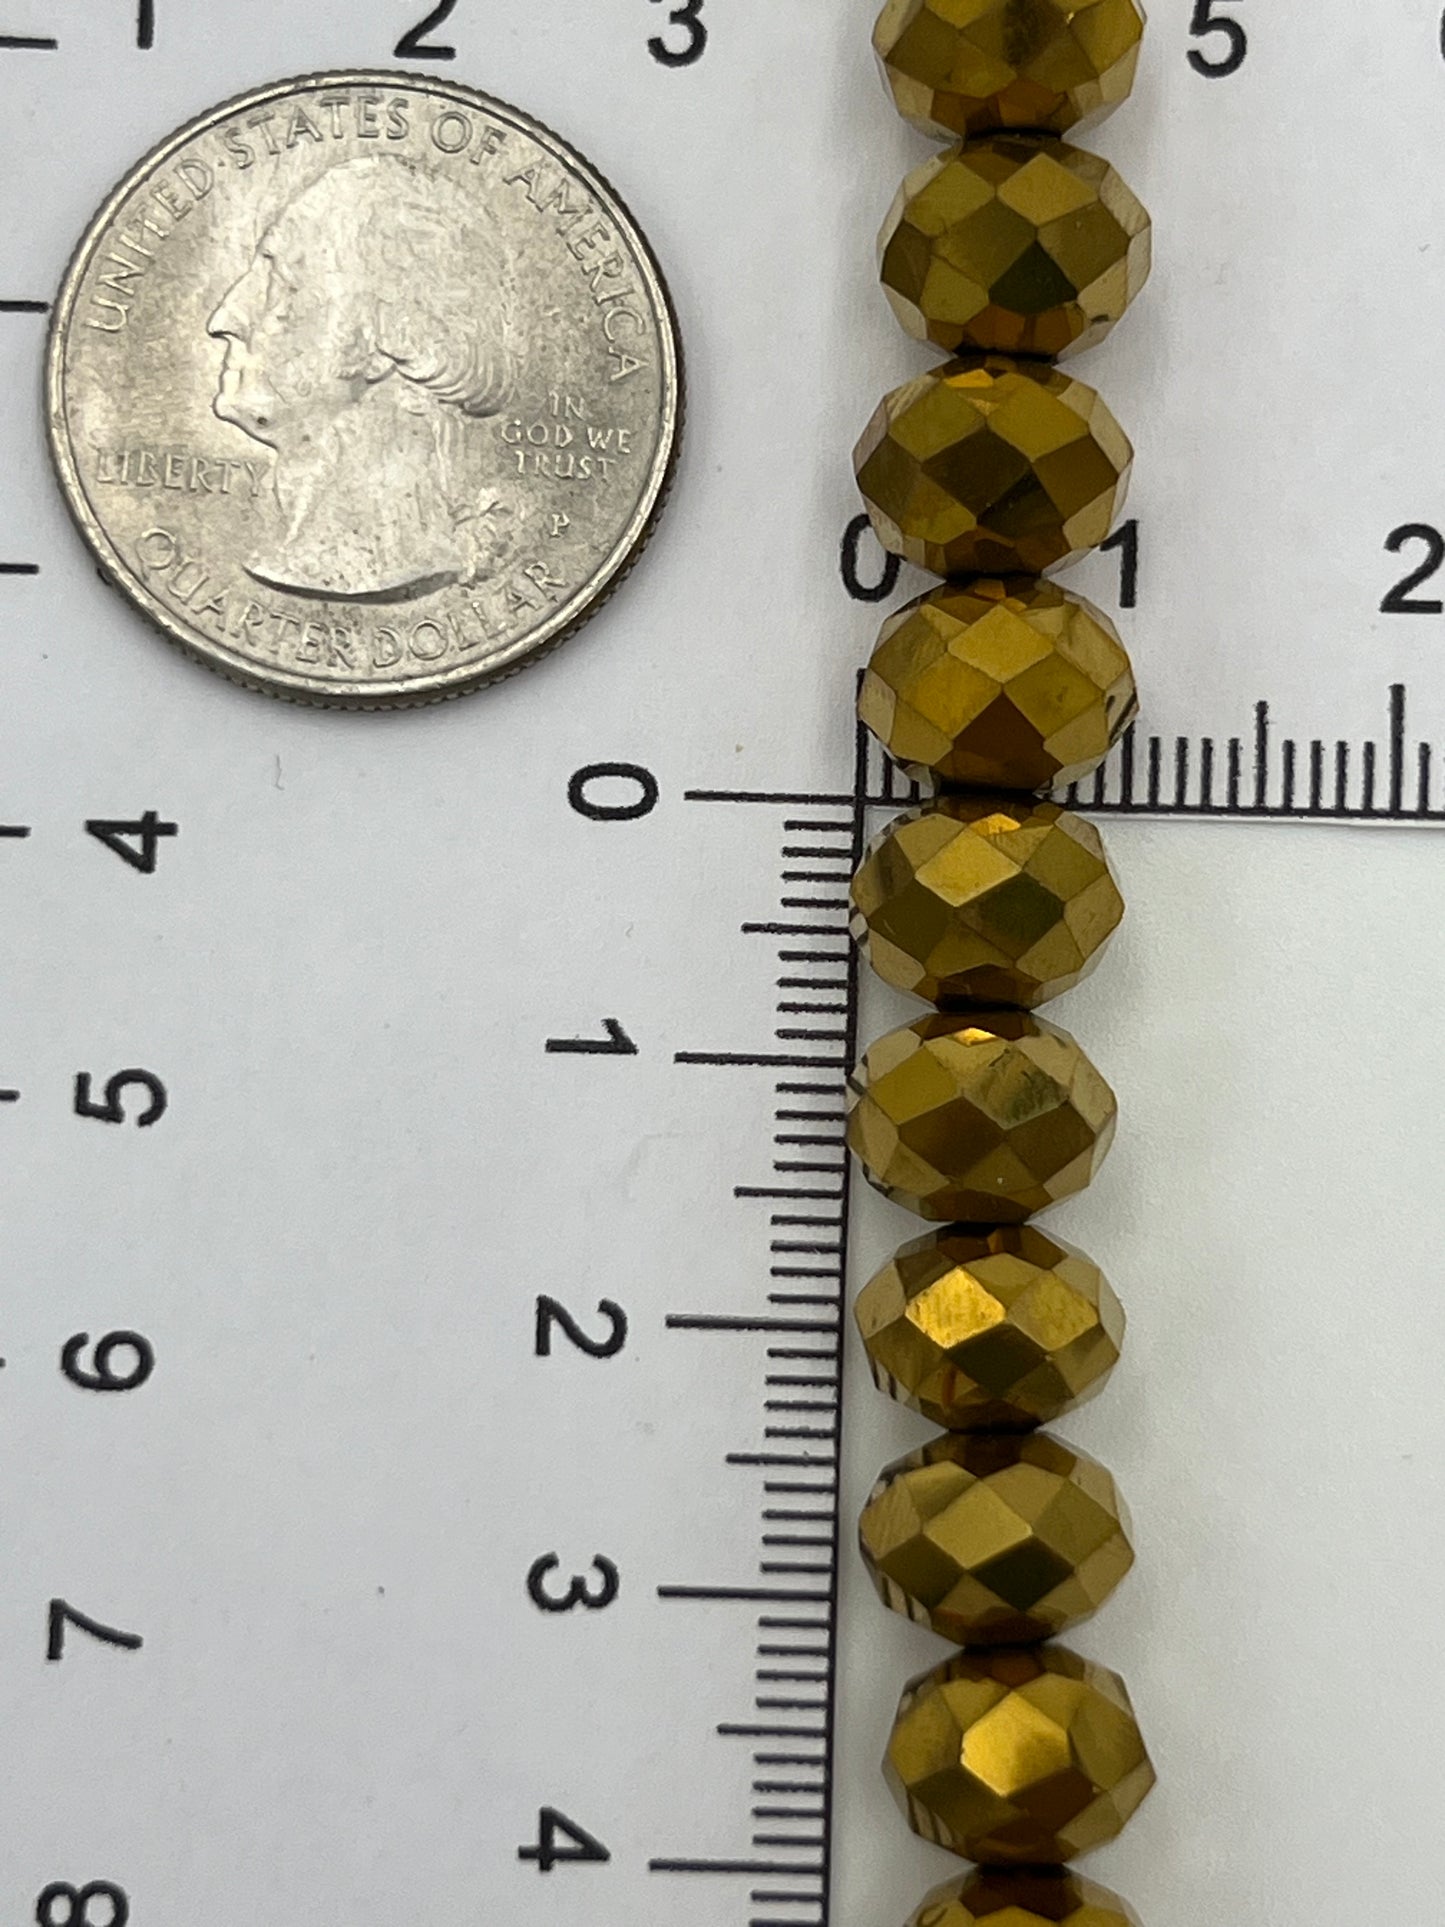 Chinese Rondell Thunder Polished Gold Finished Beads Glass 10x8mm 1 Strand (40cm)